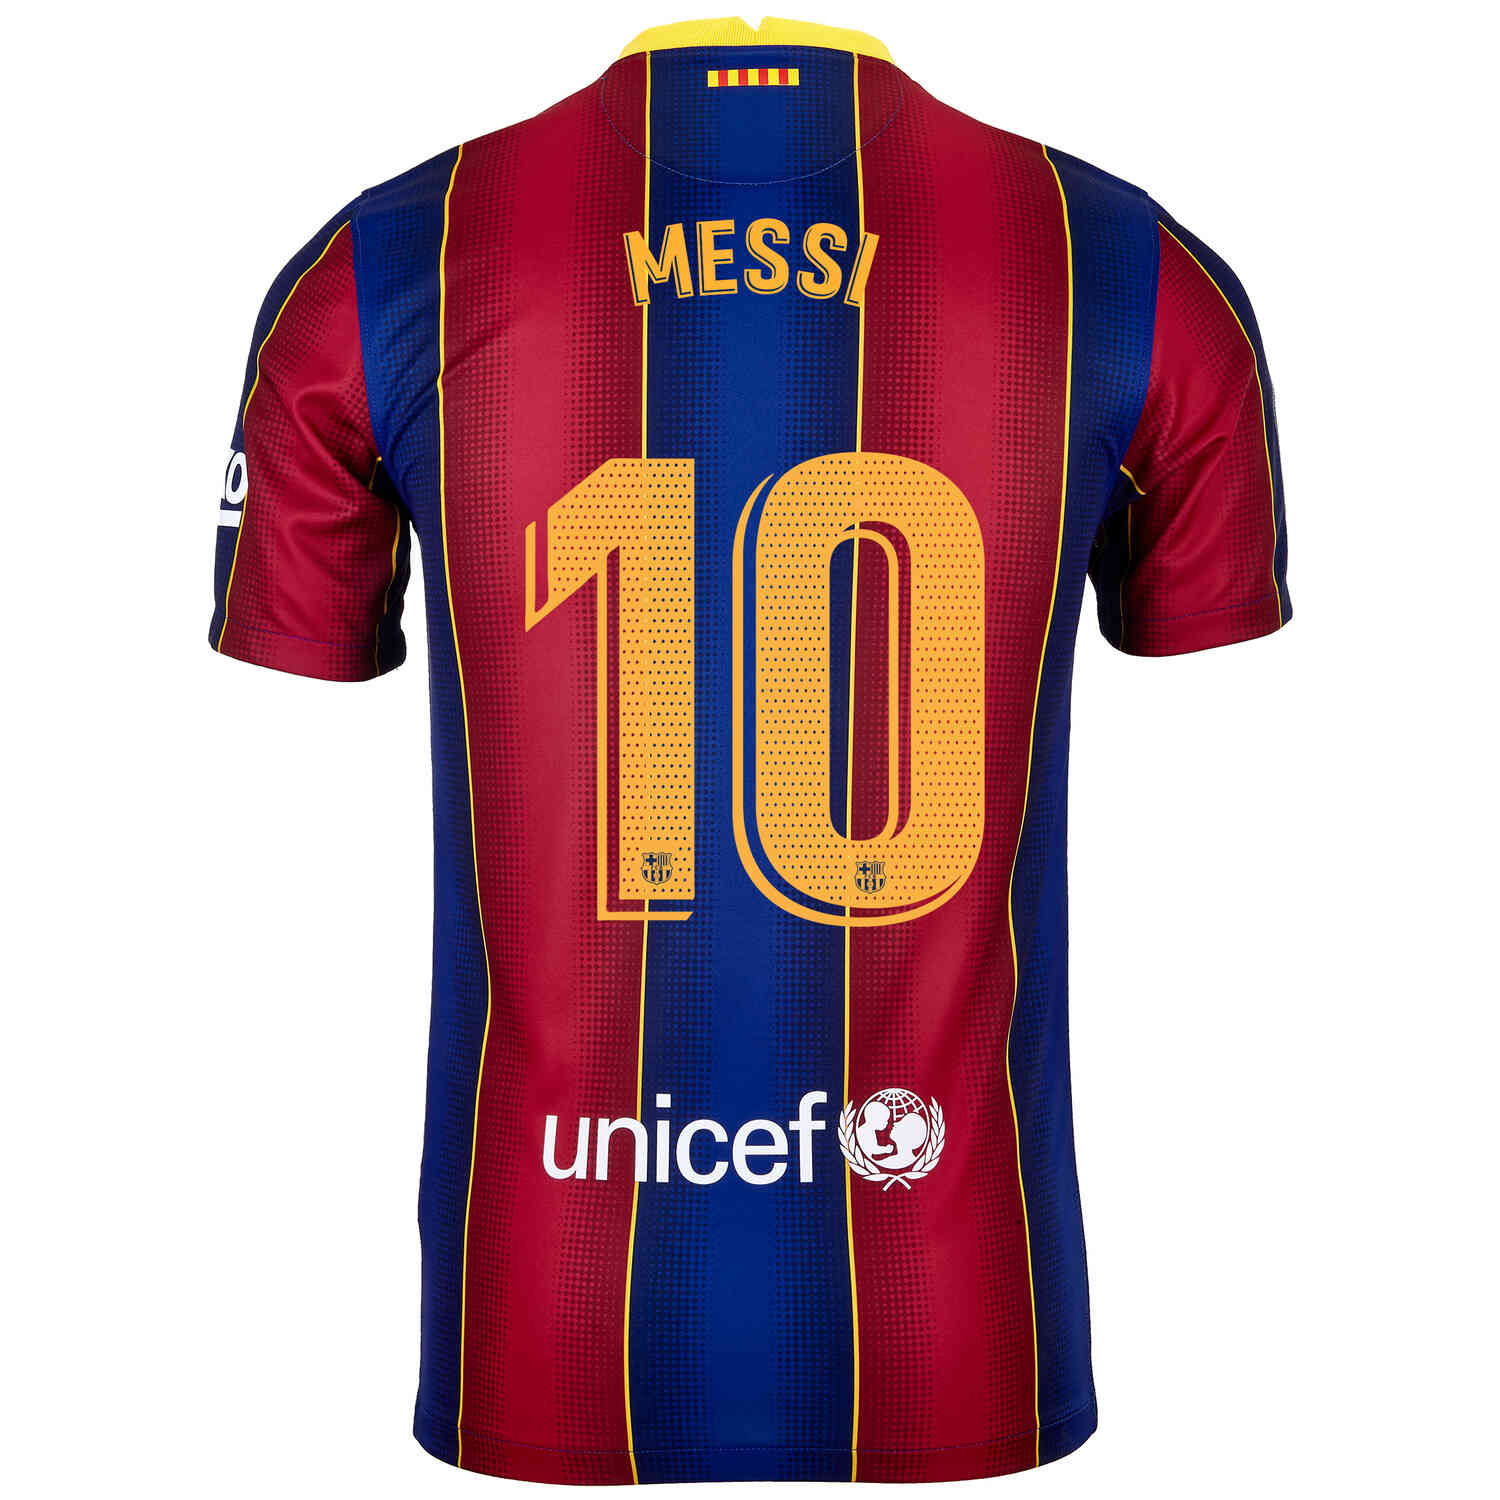 New 2020-21 football kits: Barcelona, Juventus & all the top clubs